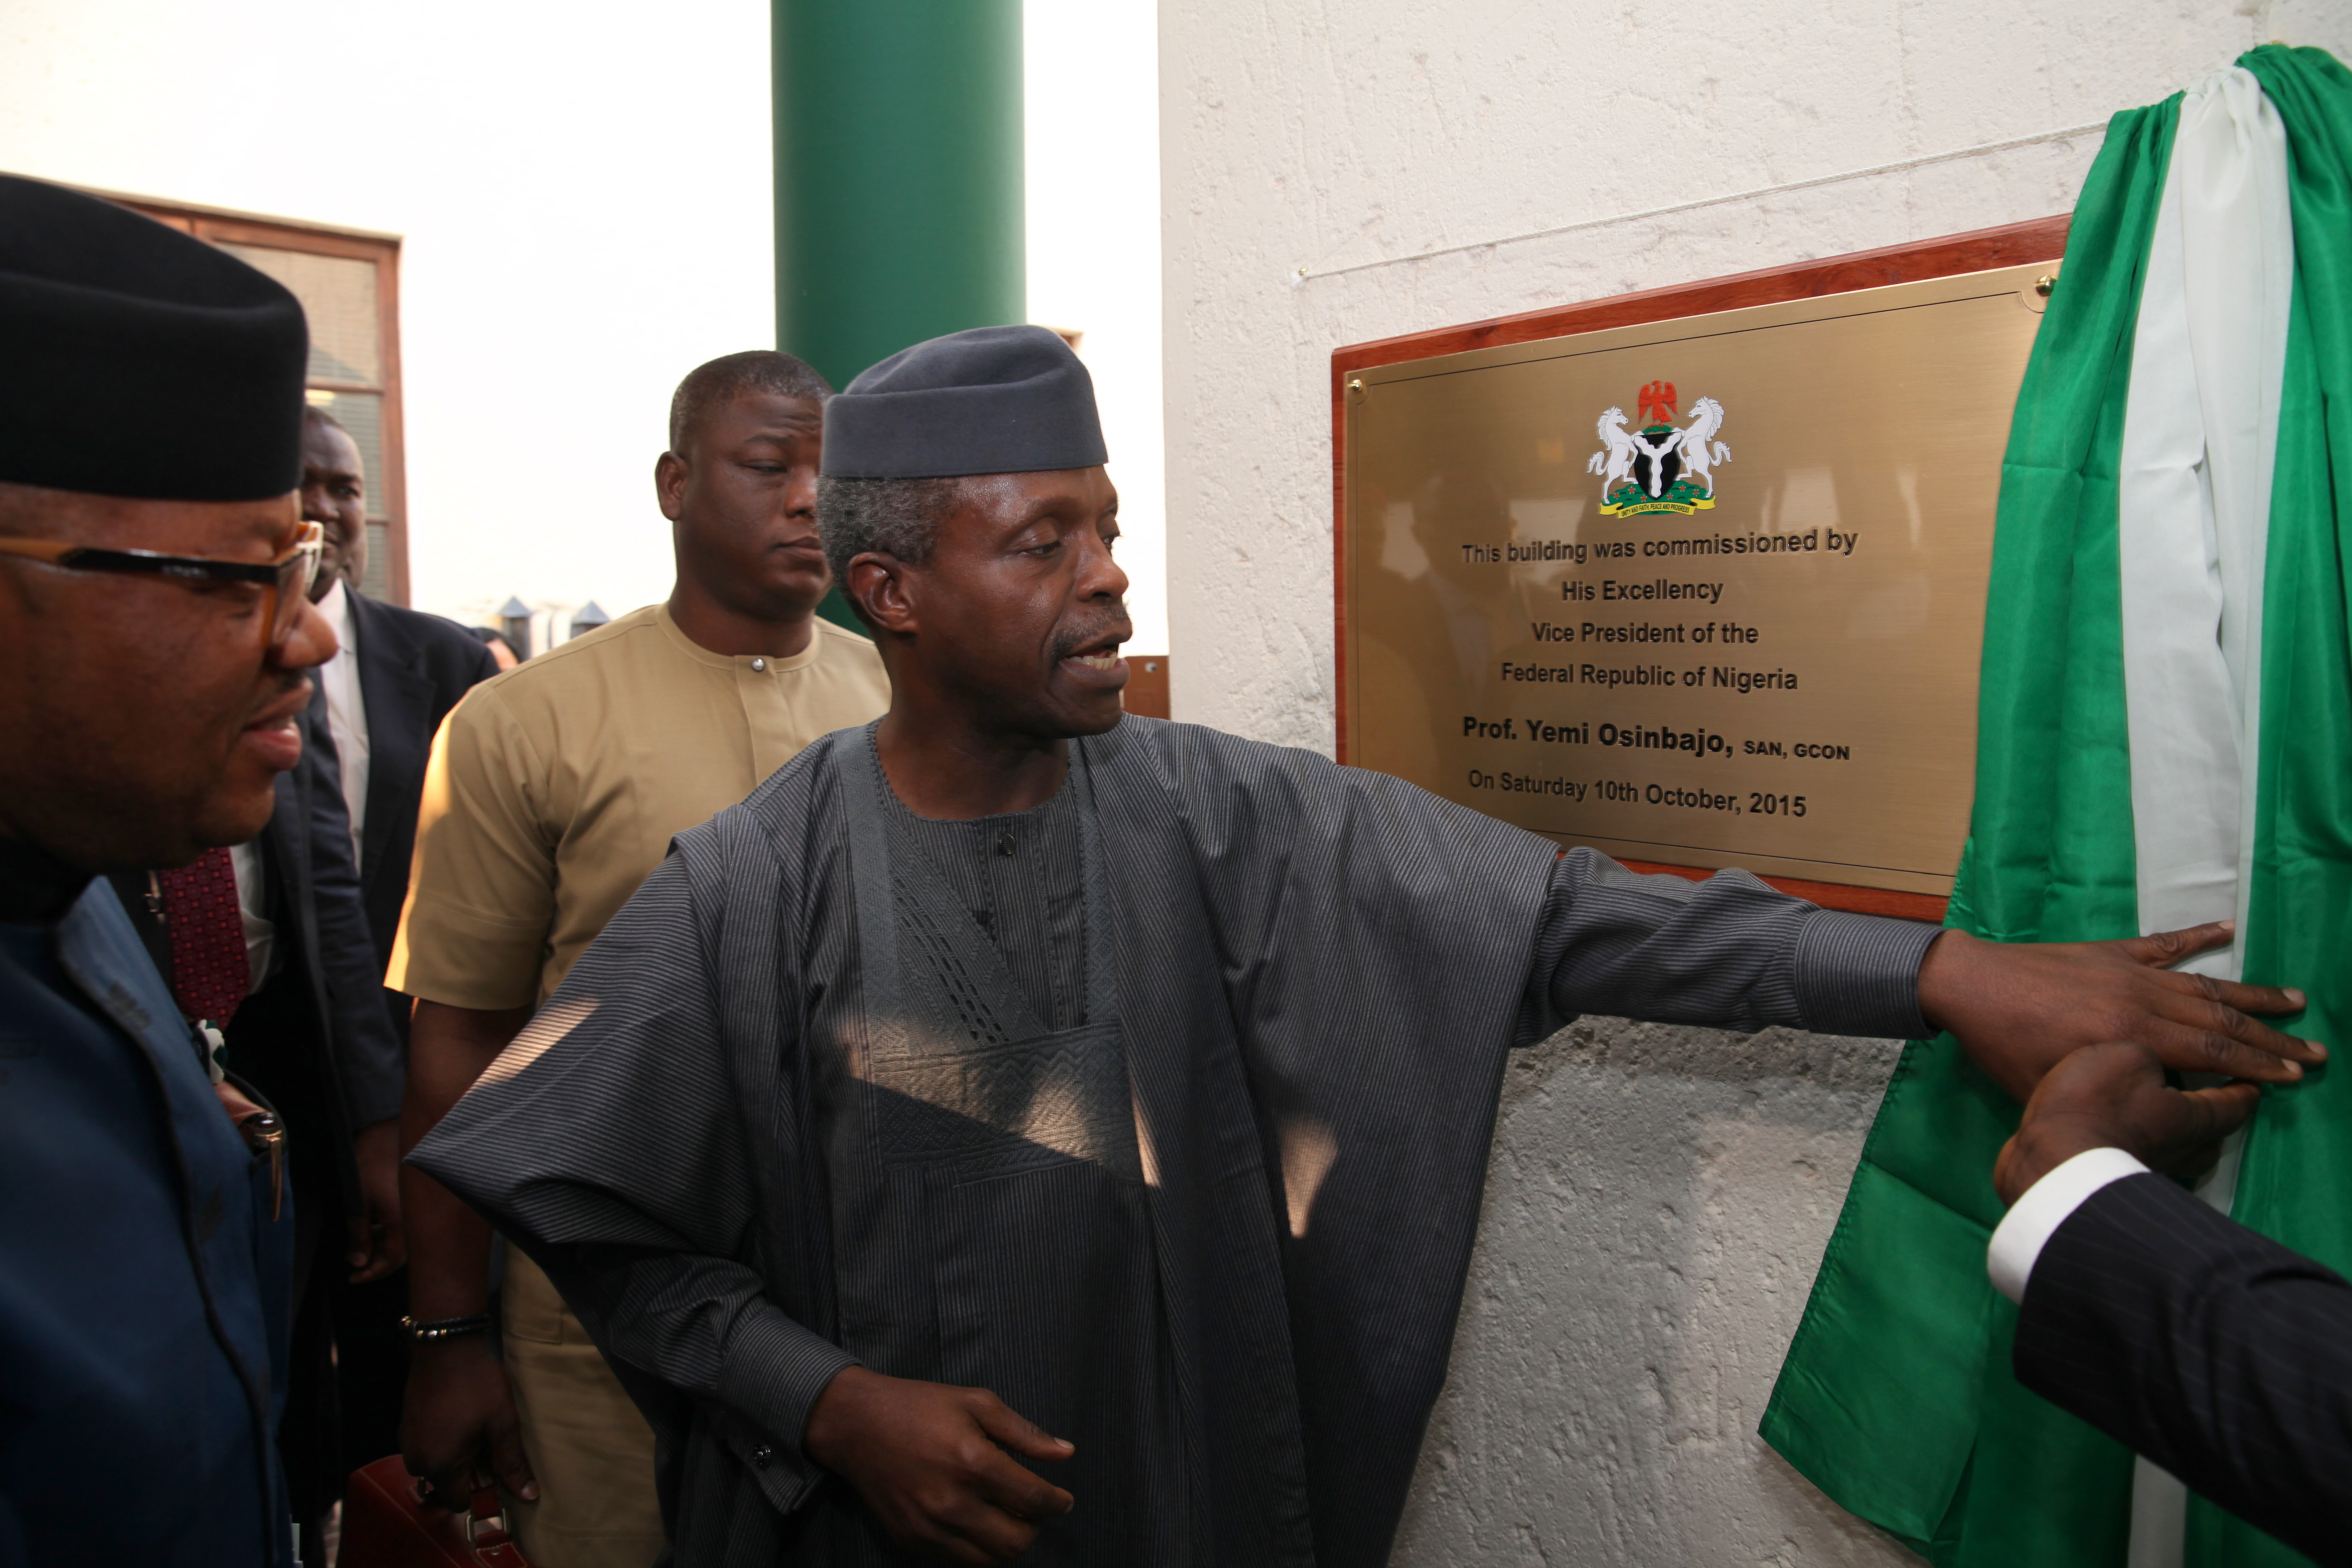 VP Osinbajo Commissions Consular Building In South Africa On 10/10/2015